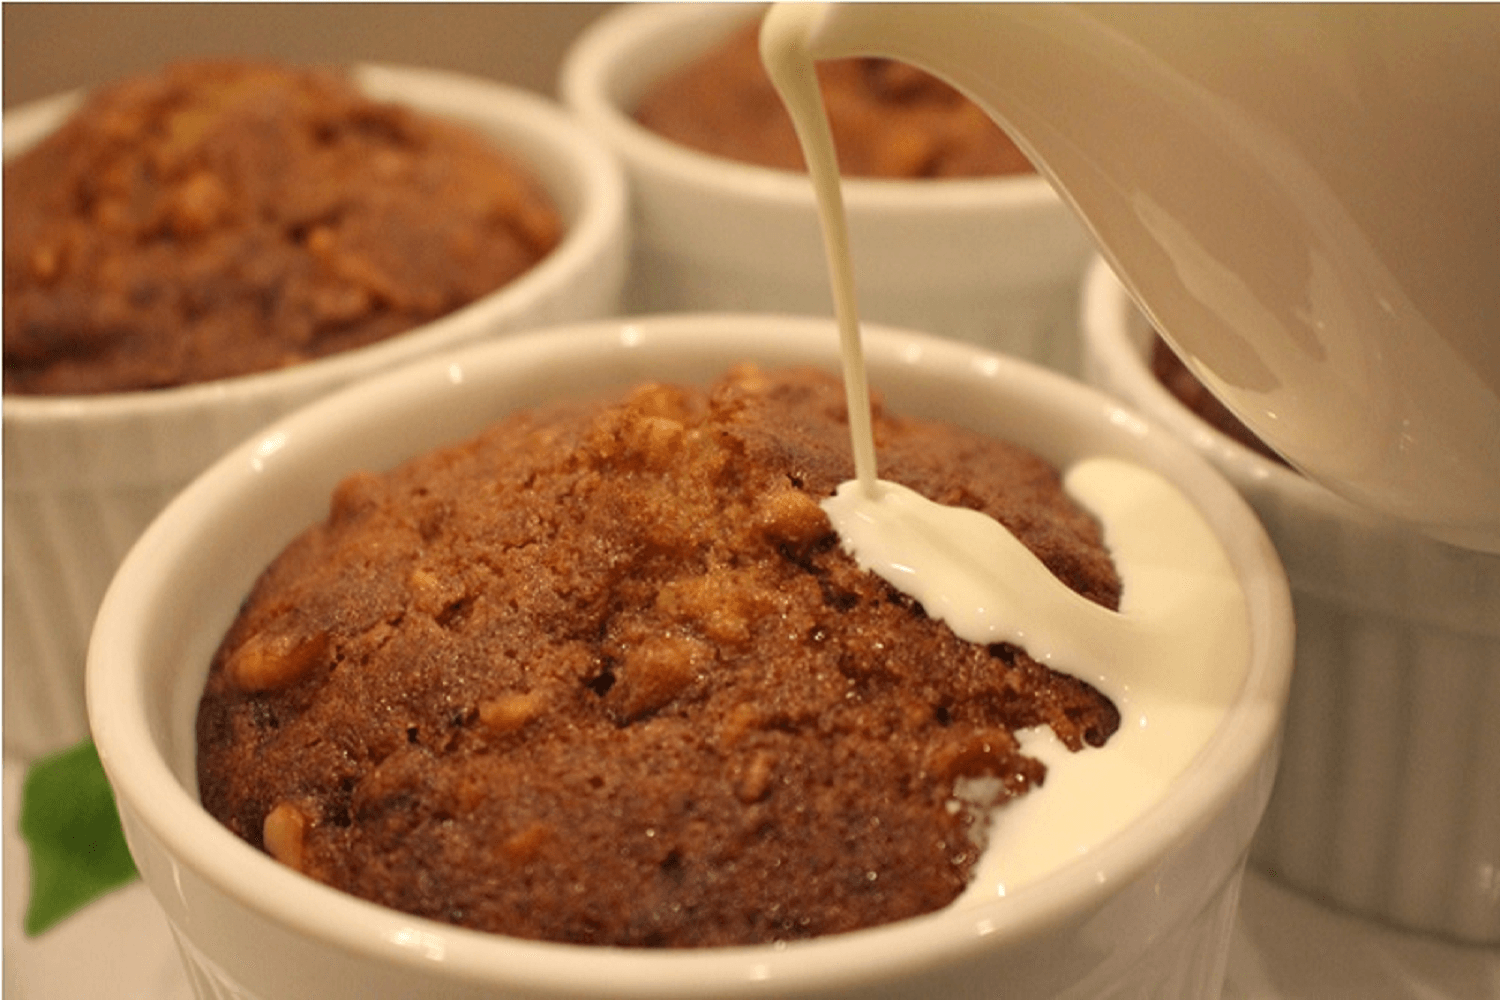 Baked Brandy Pudding